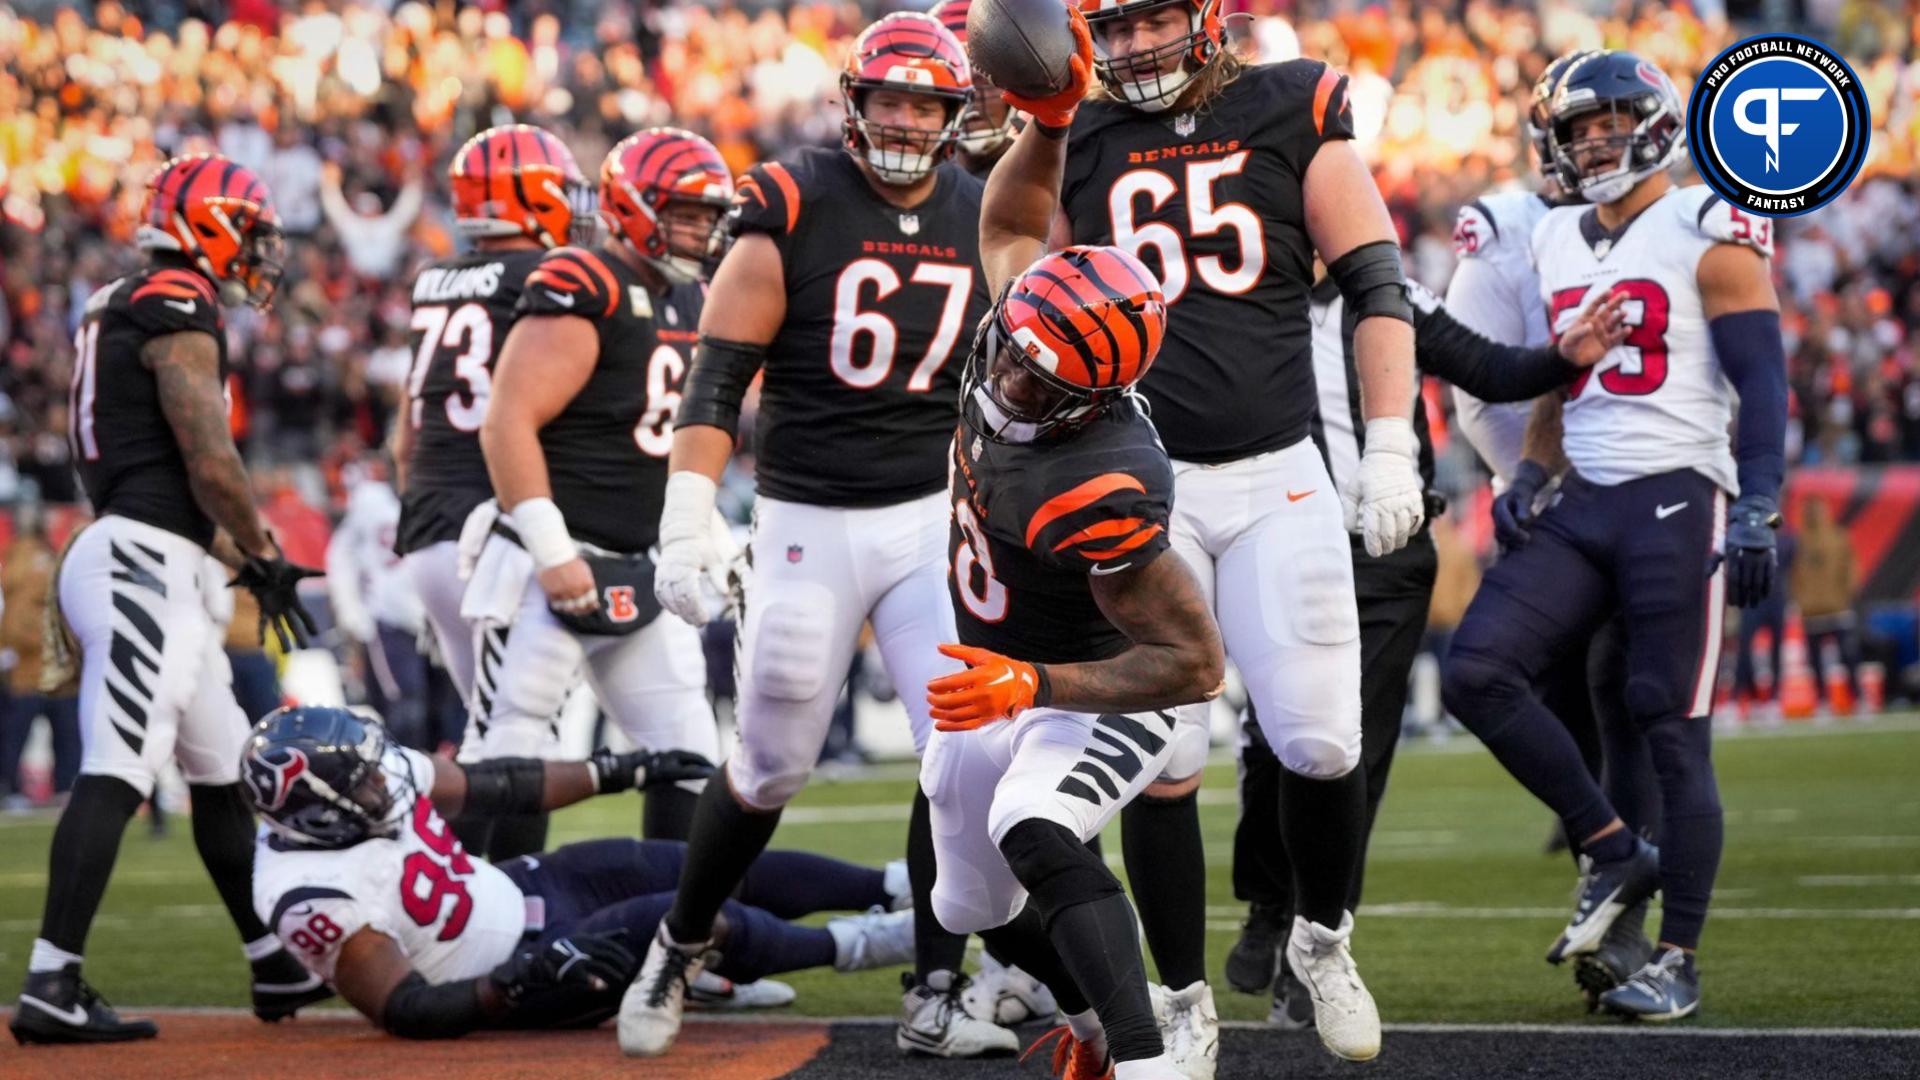 Mixon (28) spikes the ball after running in a touchdown to bring the game within three points in the fourth quarter of the NFL Week 10 game between the Cincinnati Bengals and the Houston Texans at Paycor Stadium.